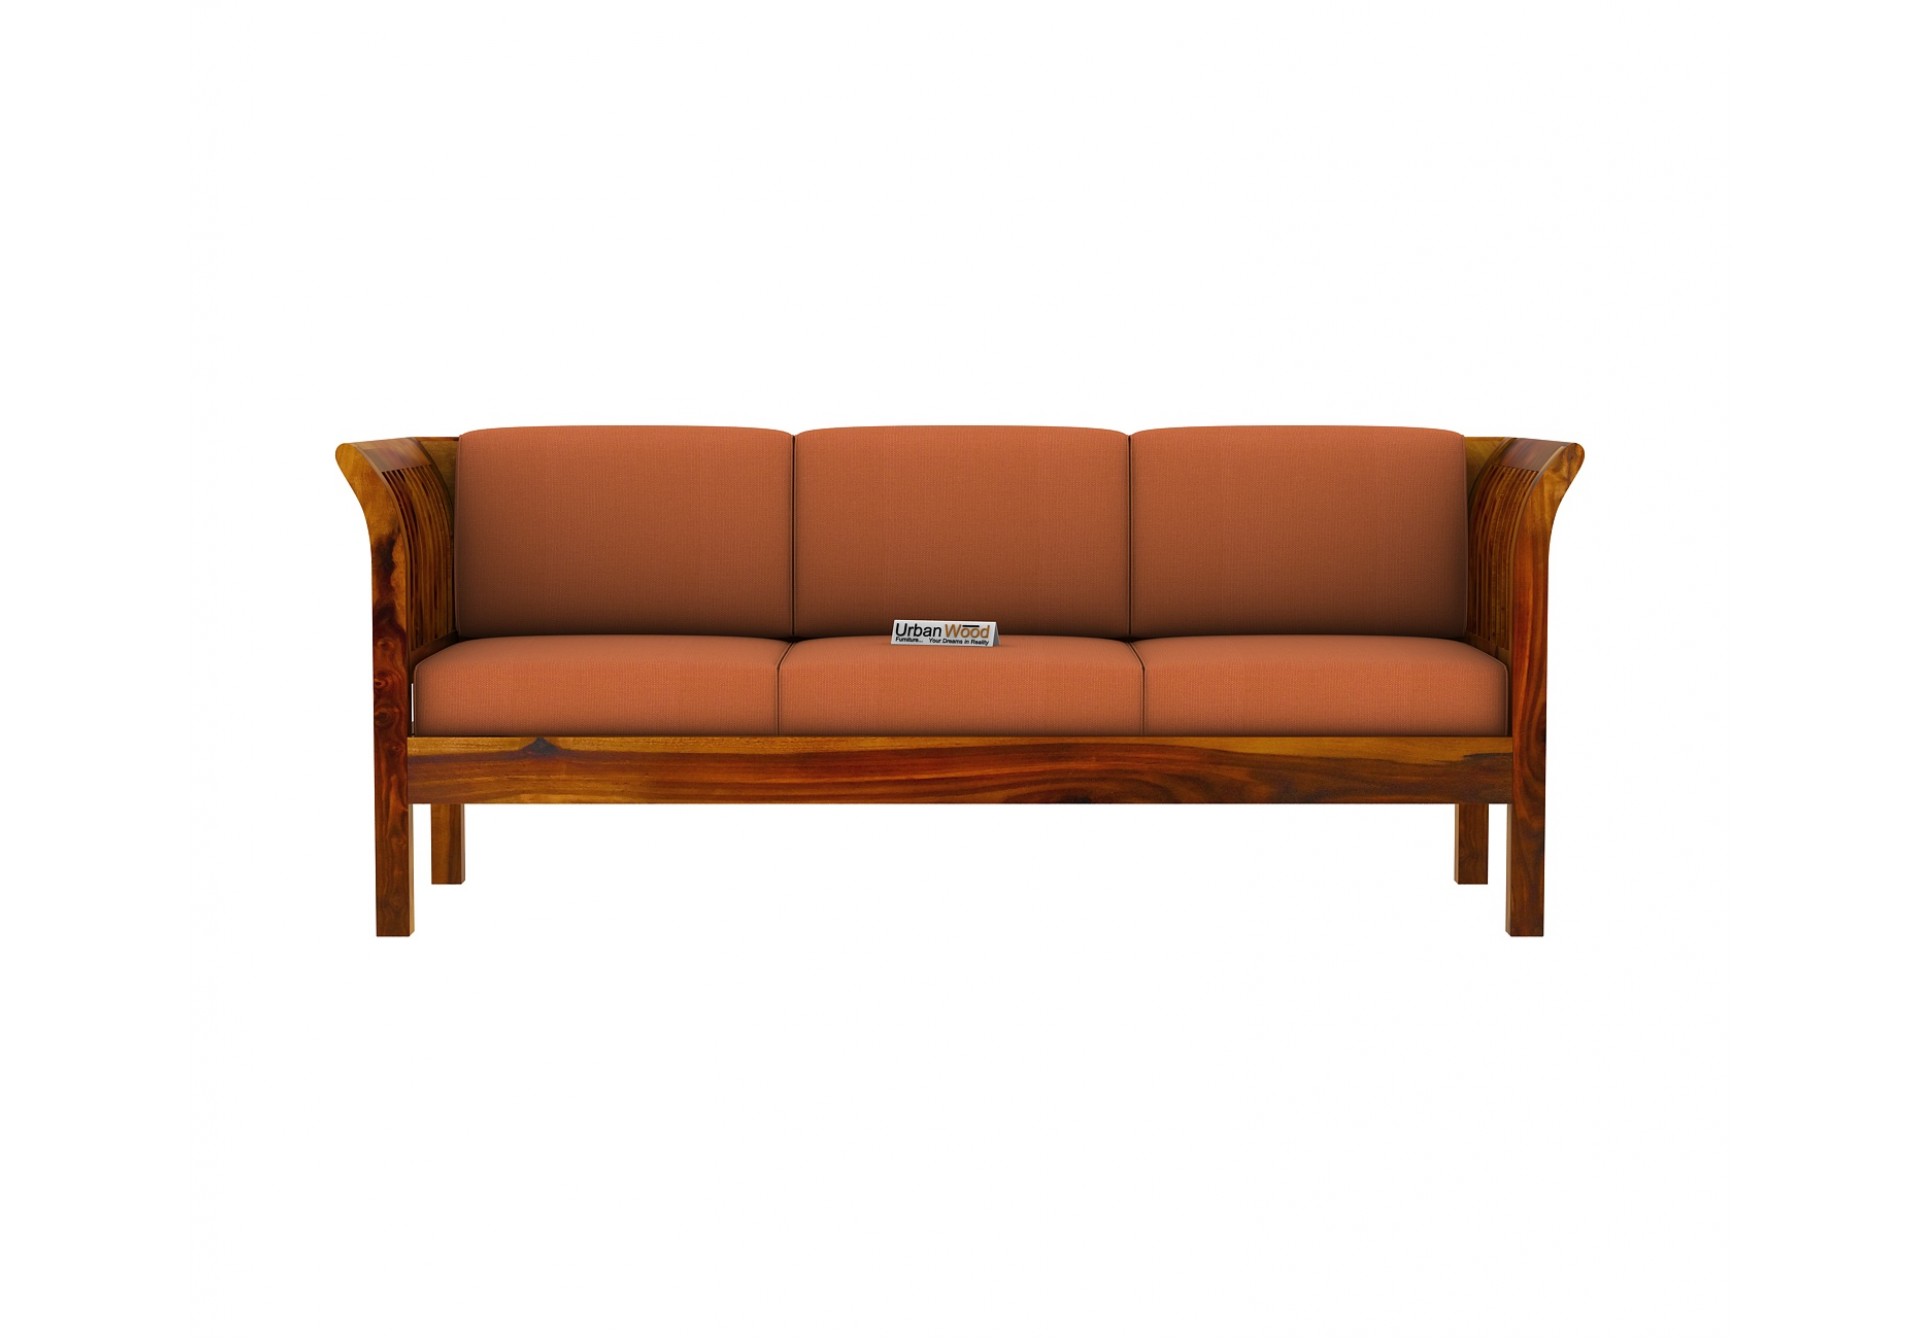 Crispin 3 Seater Wooden Sofa 